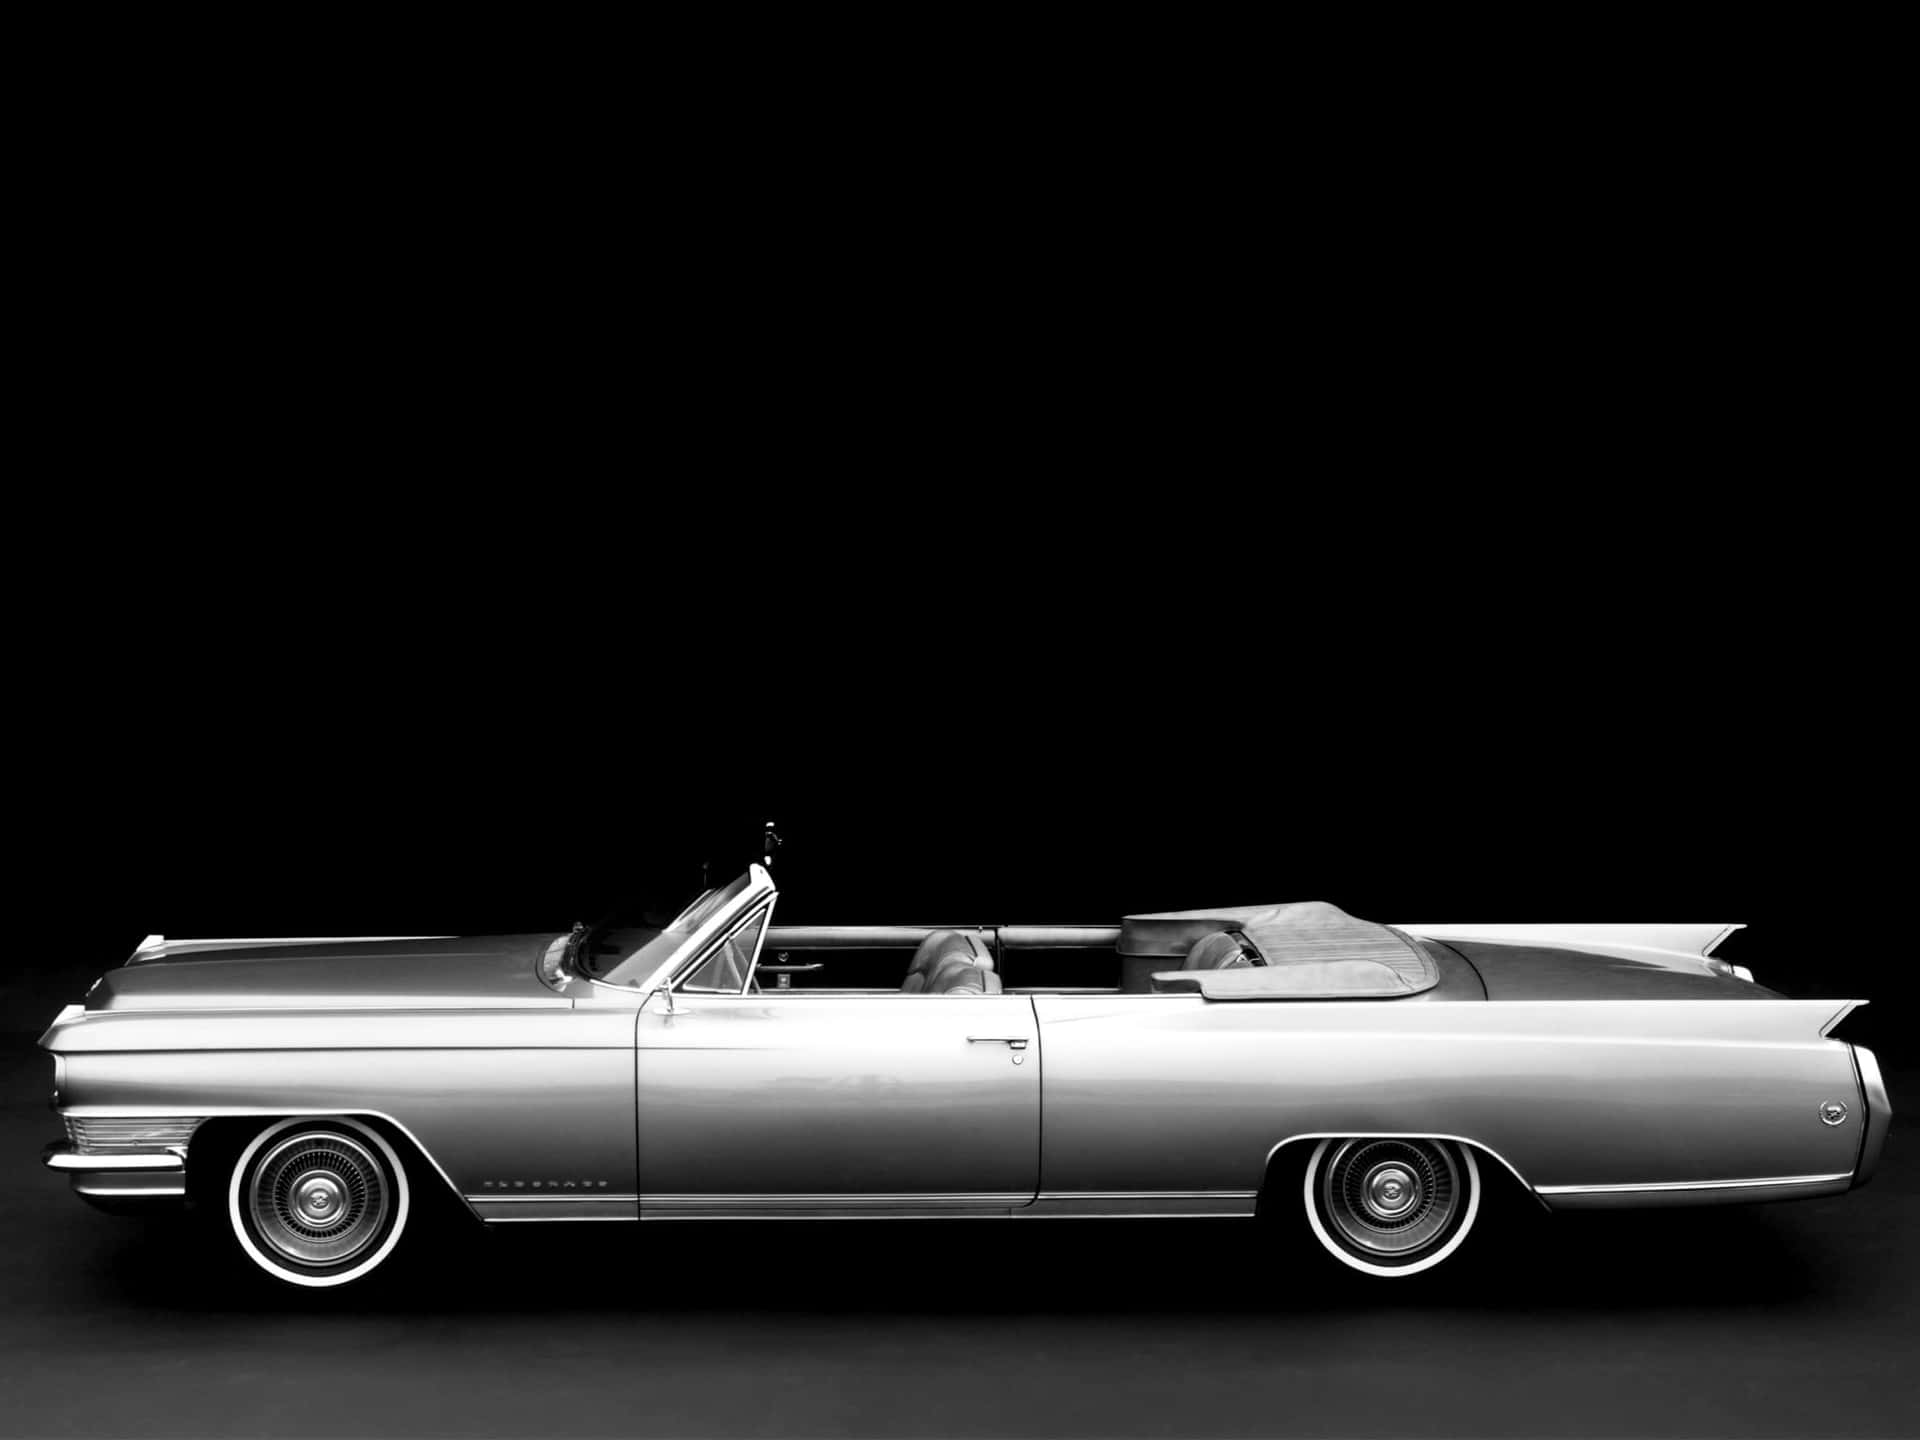 Classic Luxury - The Timeless Cadillac Fleetwood Wallpaper